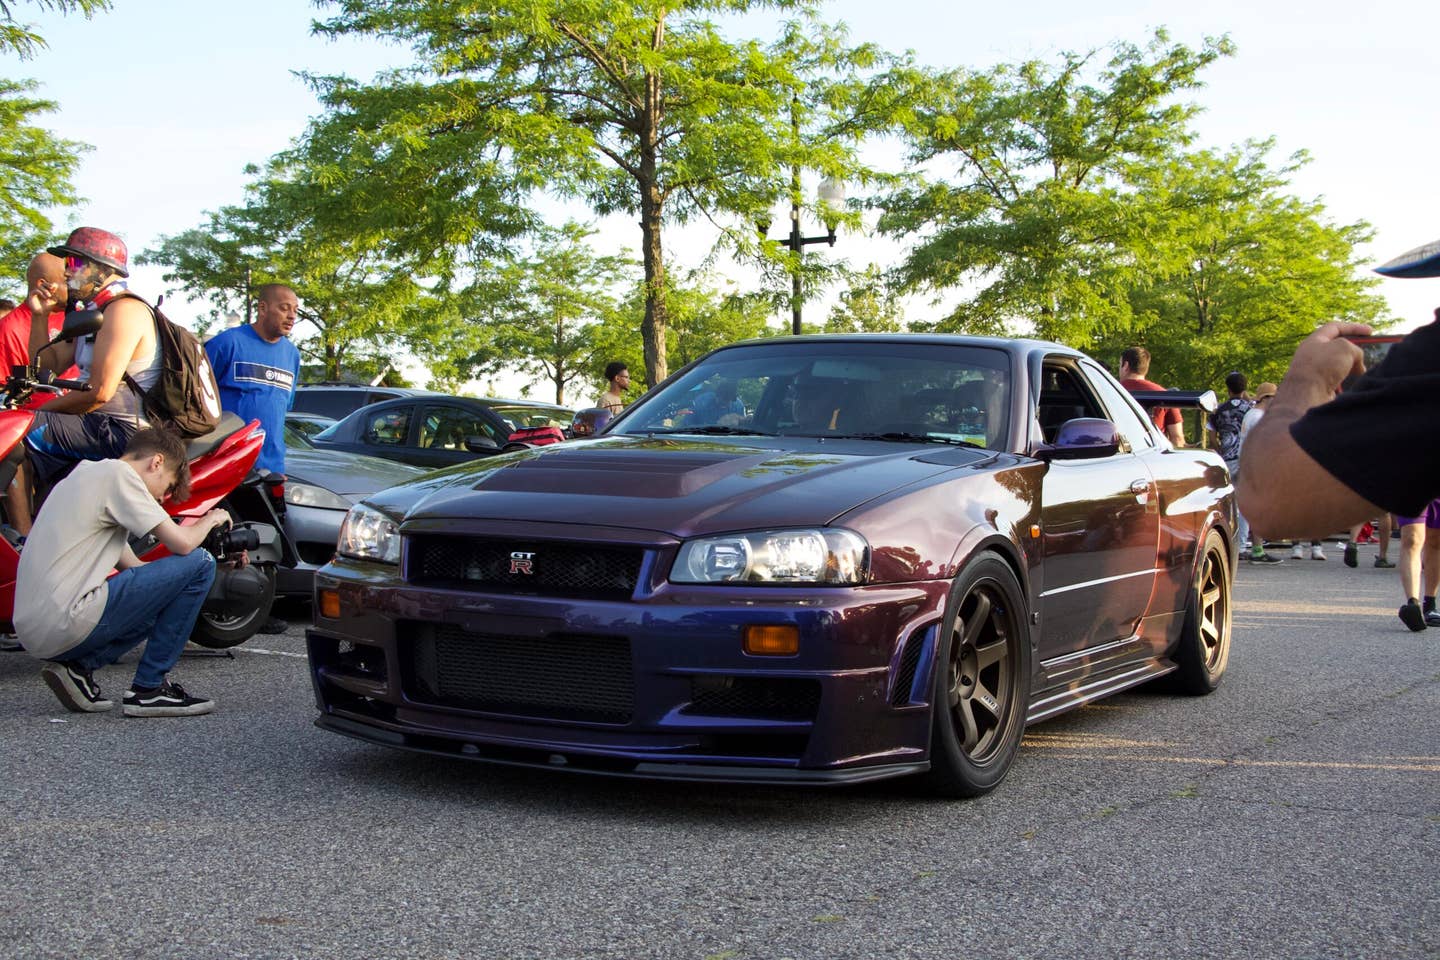 R34 generation Nissan GT-R at Cars and Coffee.